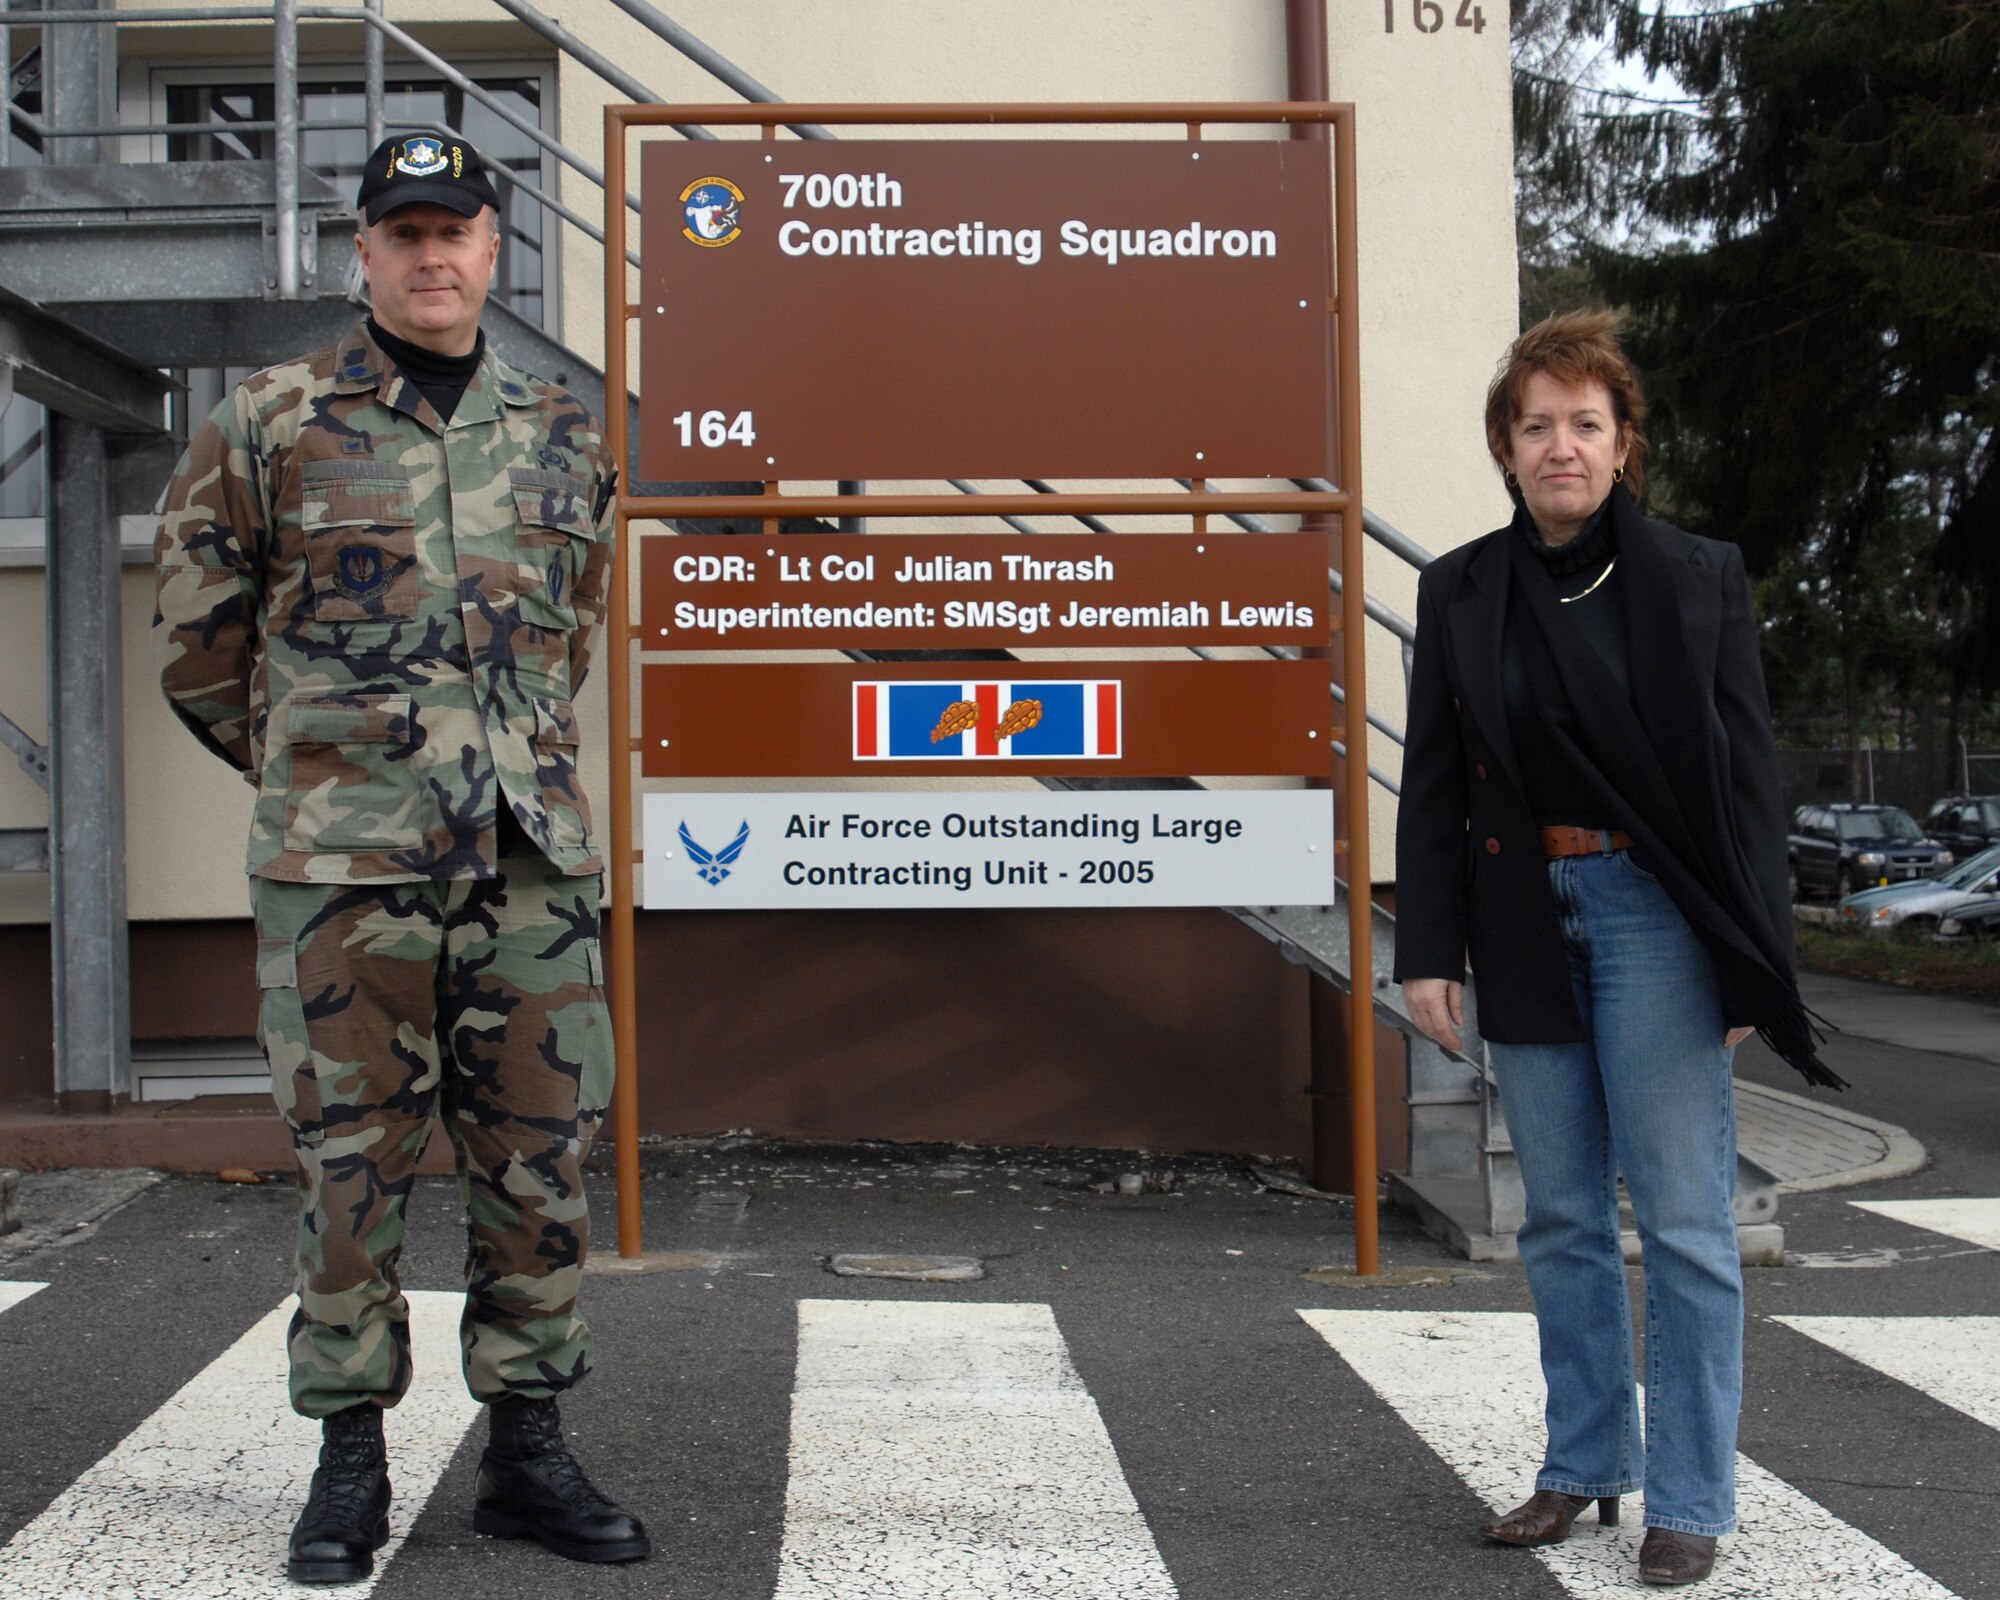 Lt. Col. Julian Thrash, 700th Contracting Squadron commander, and Marianne Seufert, director of Business and Operations, pose for a photo in front of their squadron sign Jan. 18, at Rhine Ordnance Barracks. The 700th Contracting Squadron is a unit made up of Army, Air Force and civilian personnel that perform day –to- day contracting missions. (U.S. Air Force Photo/A1C Kenny Holston)

